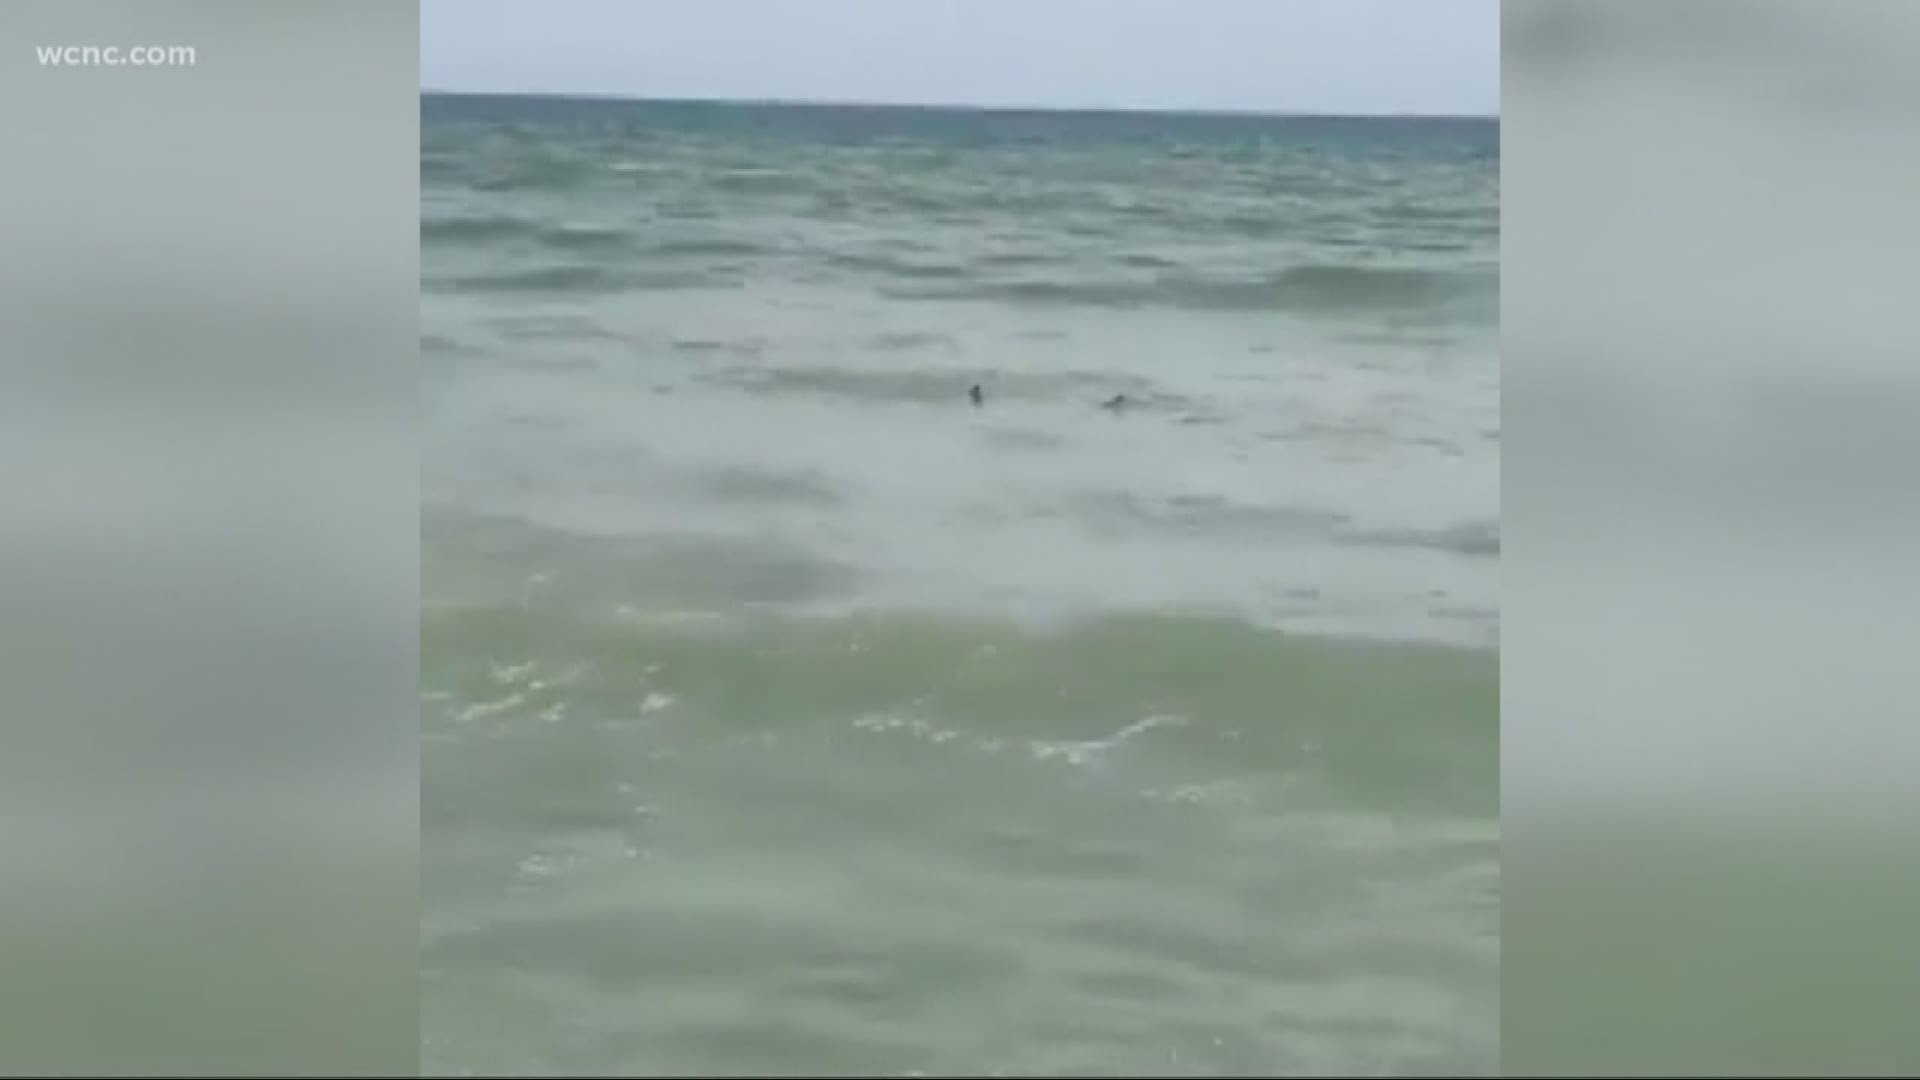 A South Carolina woman's video is going viral after she spotted a Blacktip Shark swimming just off the shore in Myrtle Beach State Park.